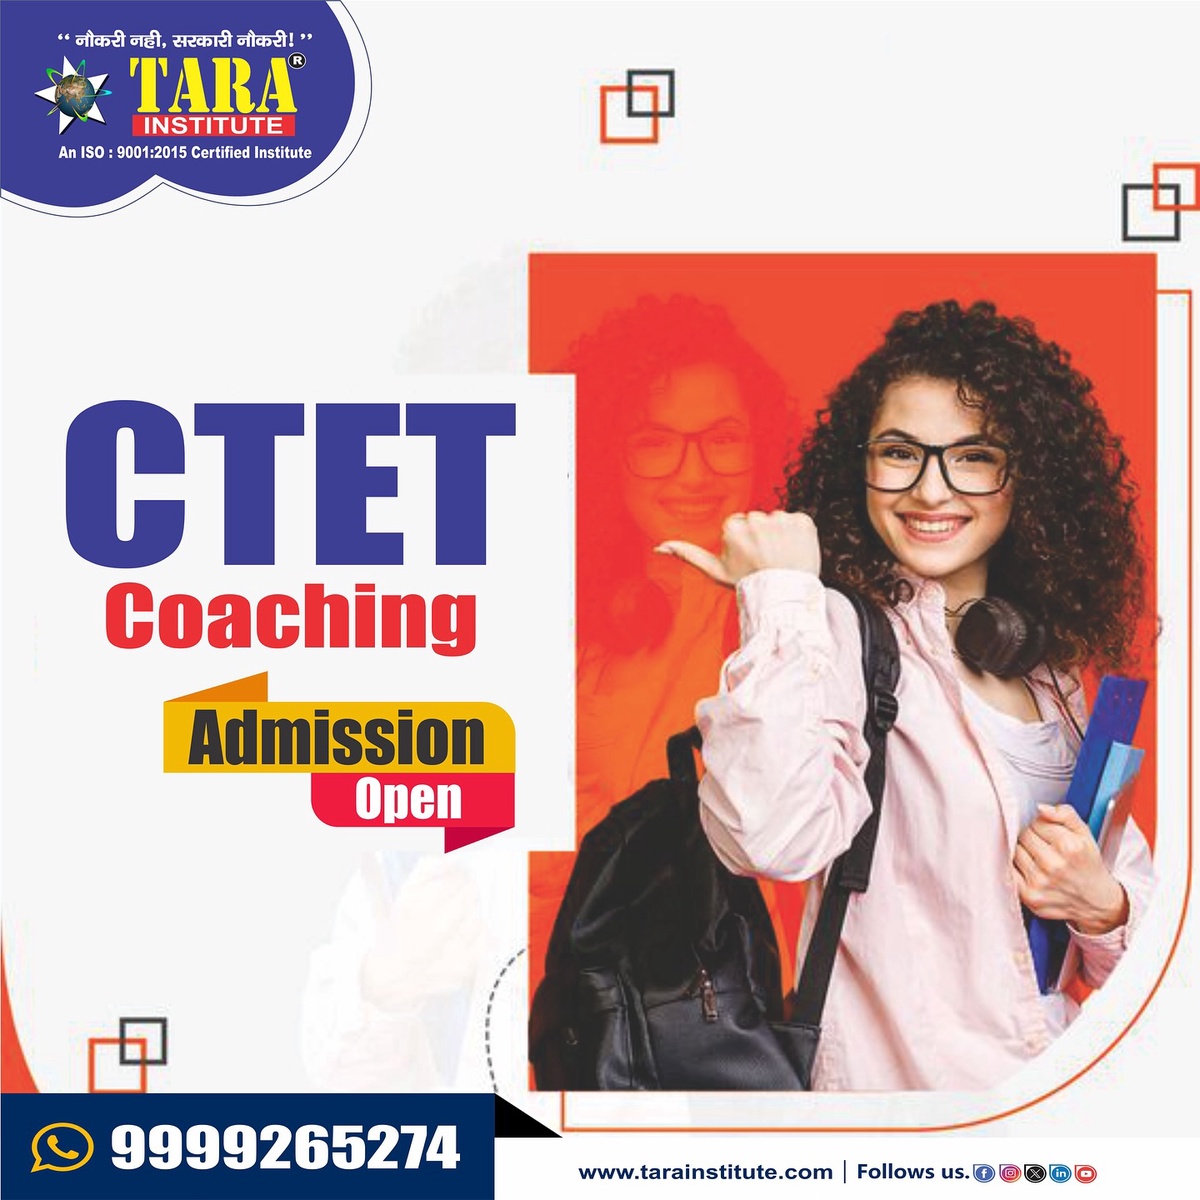 Factors to consider when selecting a CTET coaching institute in Mumbai